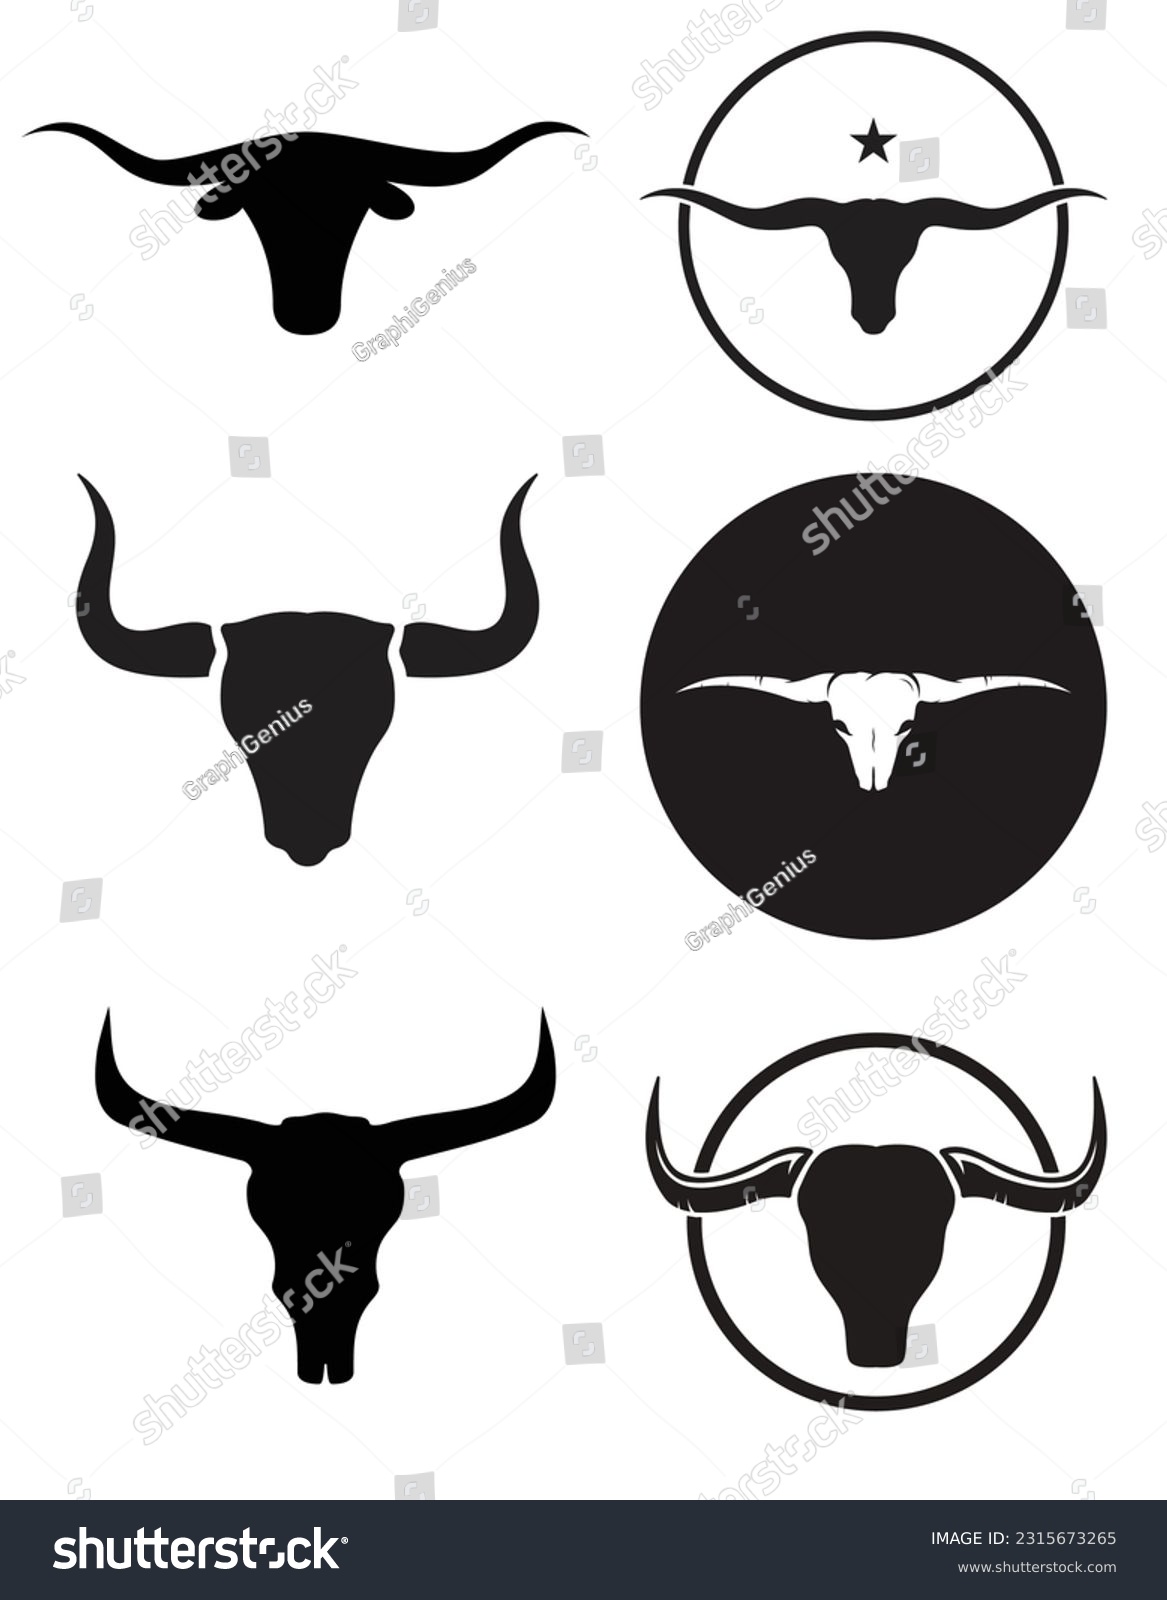 SVG of Texas Longhorn Head Svg Icons svg